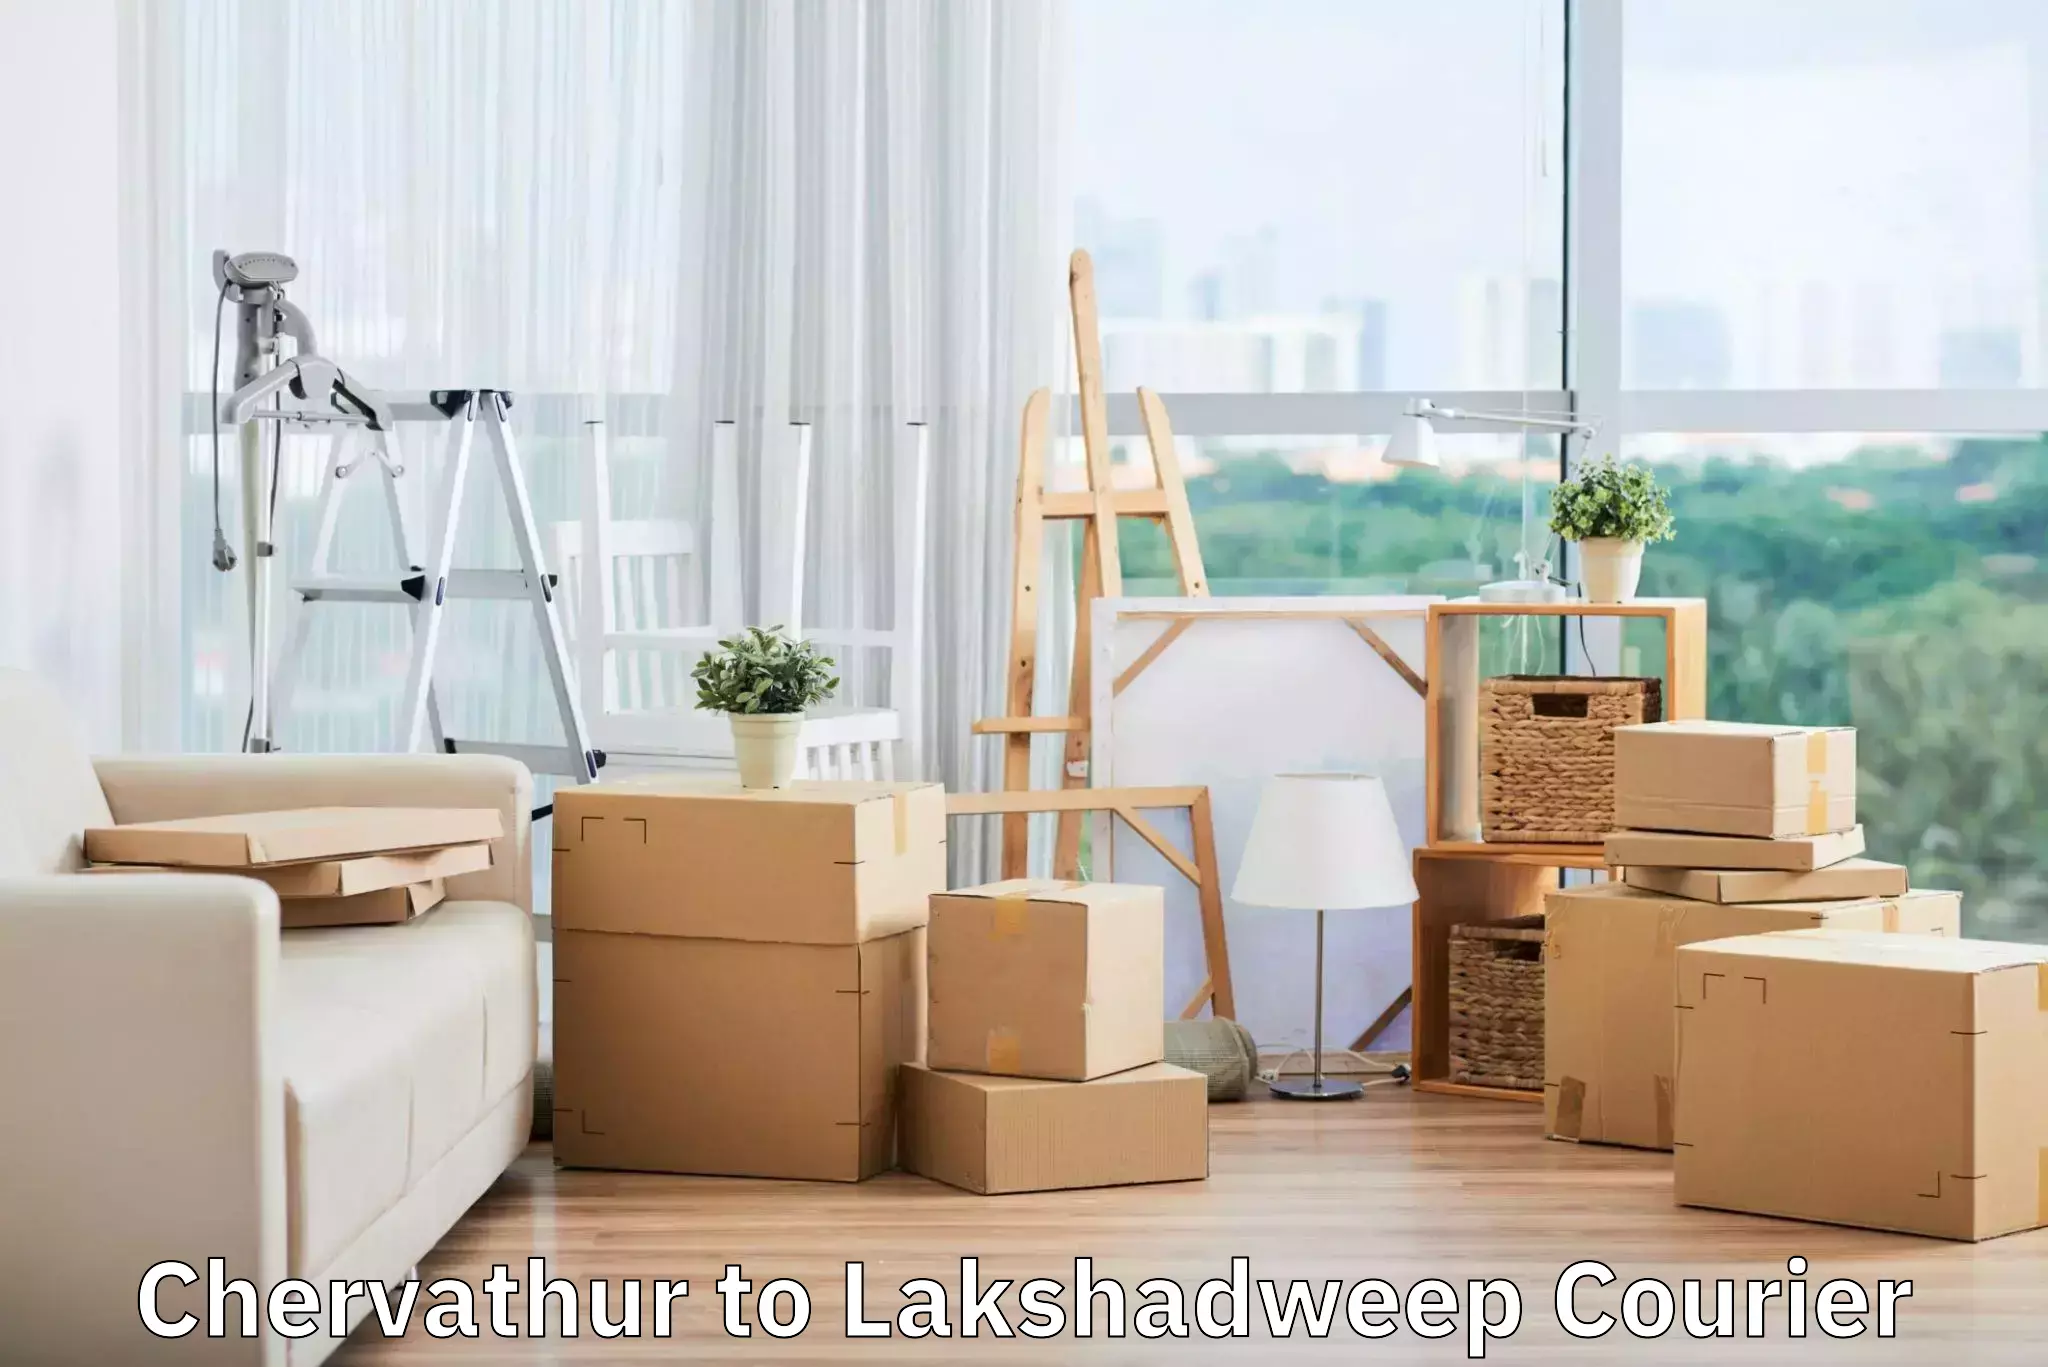 Baggage delivery solutions Chervathur to Lakshadweep